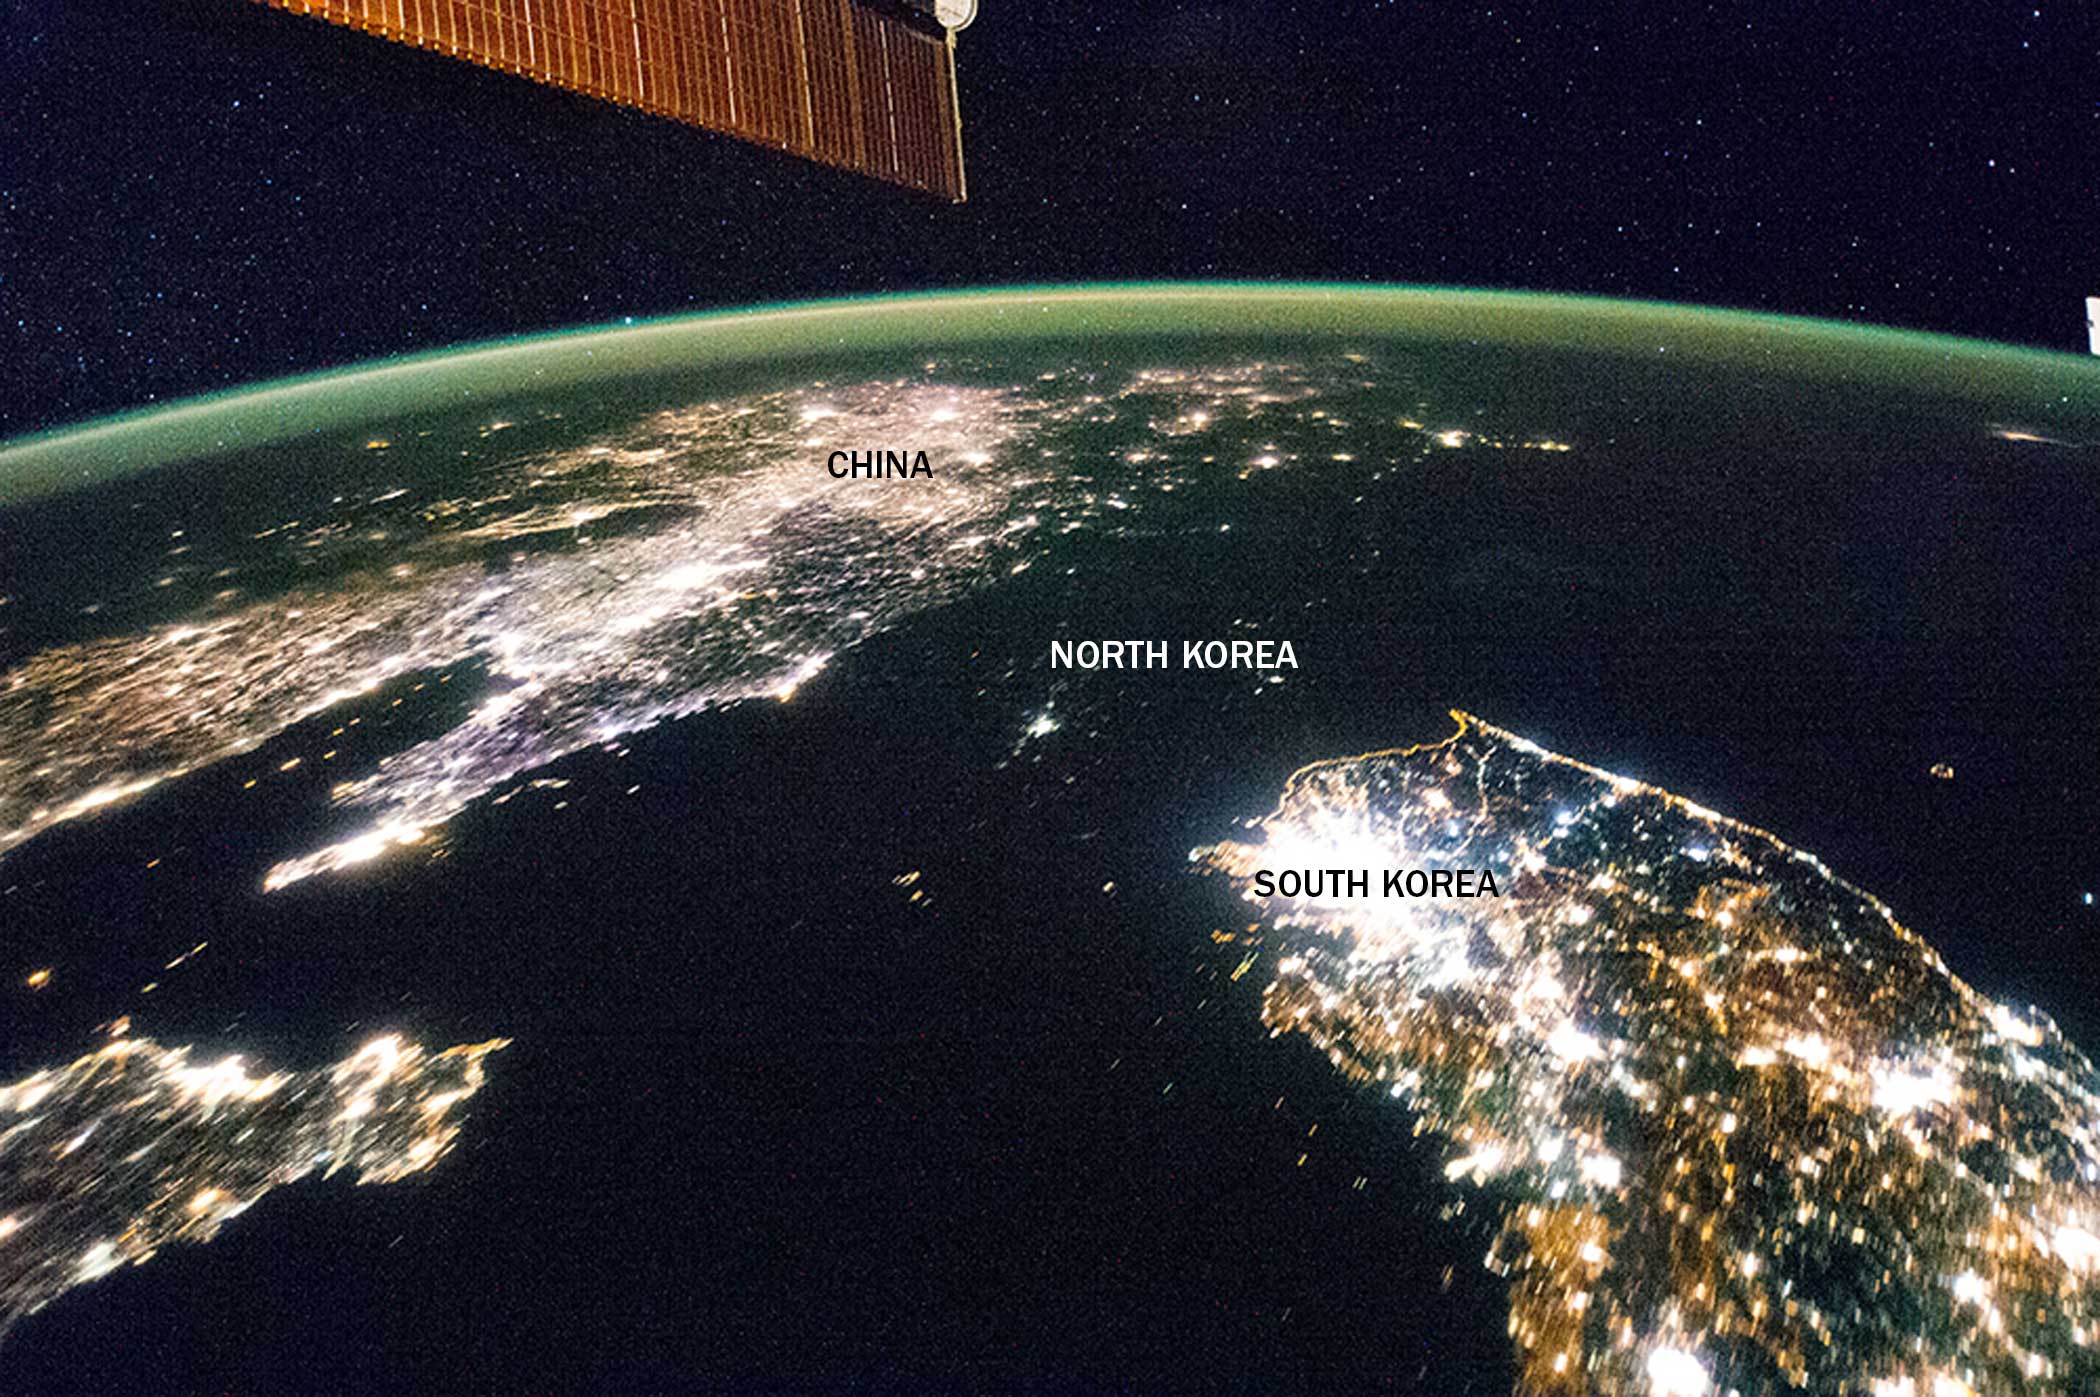 https://eol.jsc.nasa.gov/Collections/EarthFromSpace/images.pl?photo=ISS038-E-38300